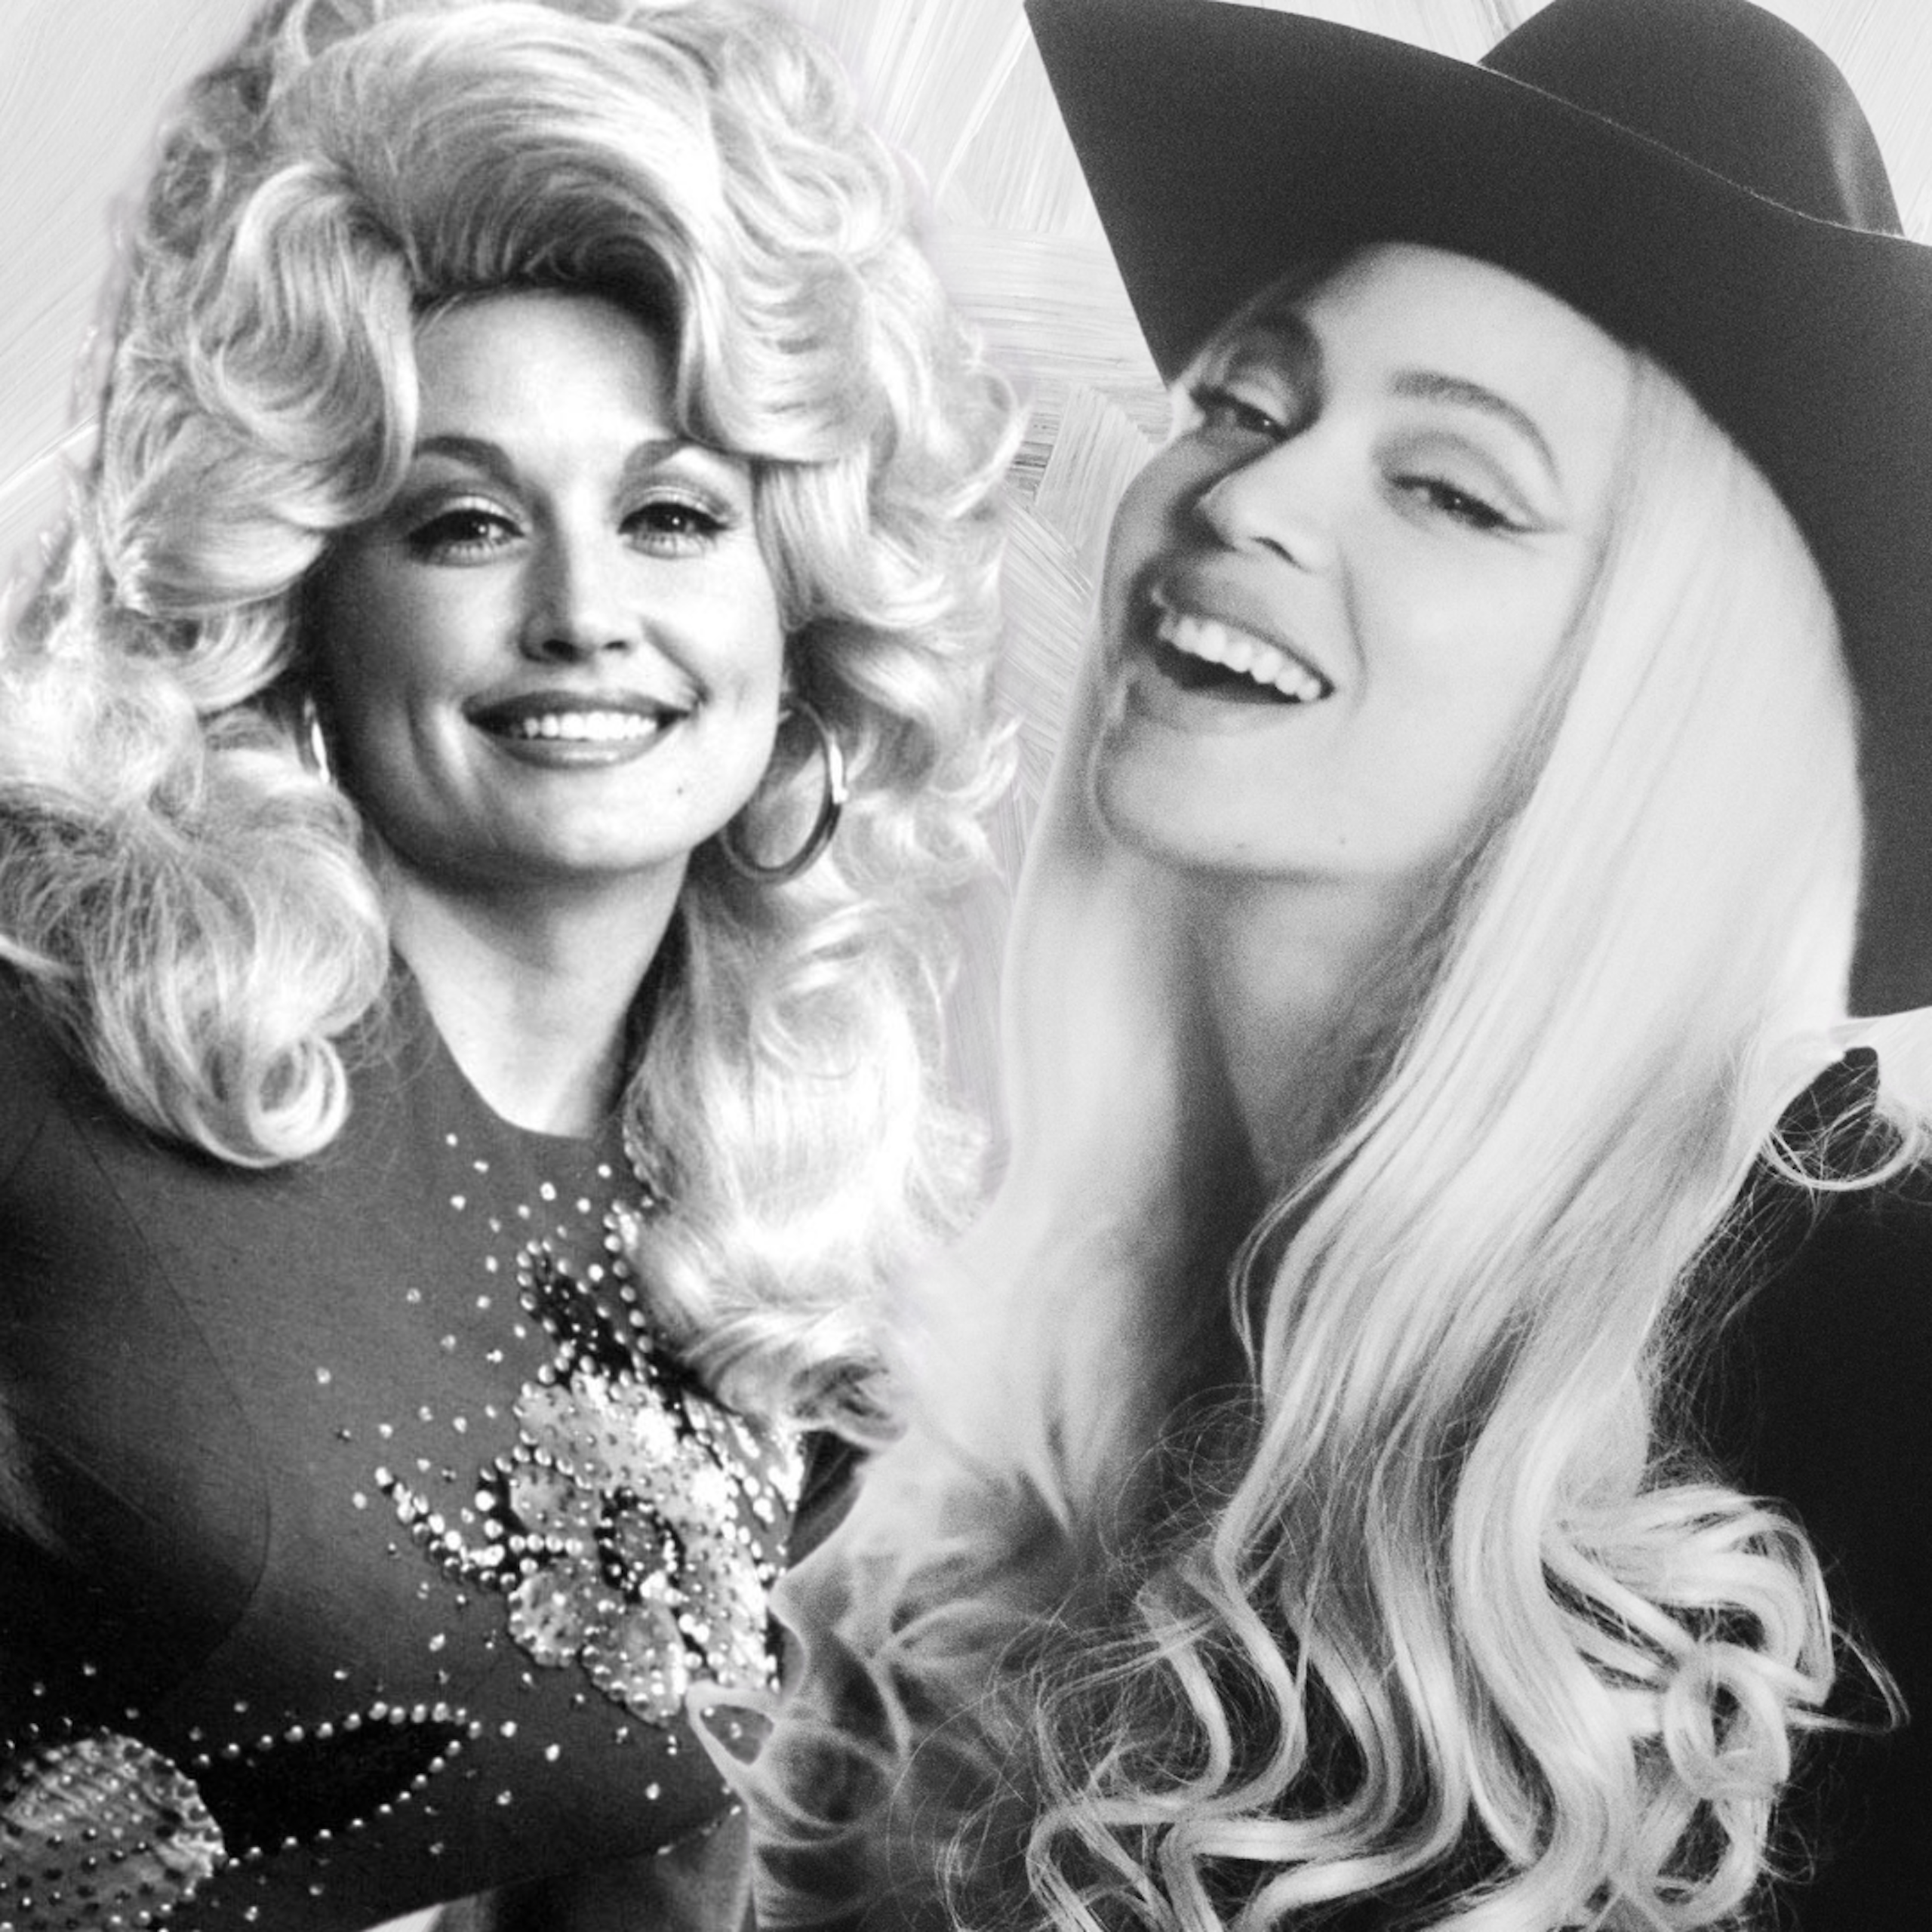 Beyoncé and Dolly Parton’s versions of Jolene represent two sides of southern femininity